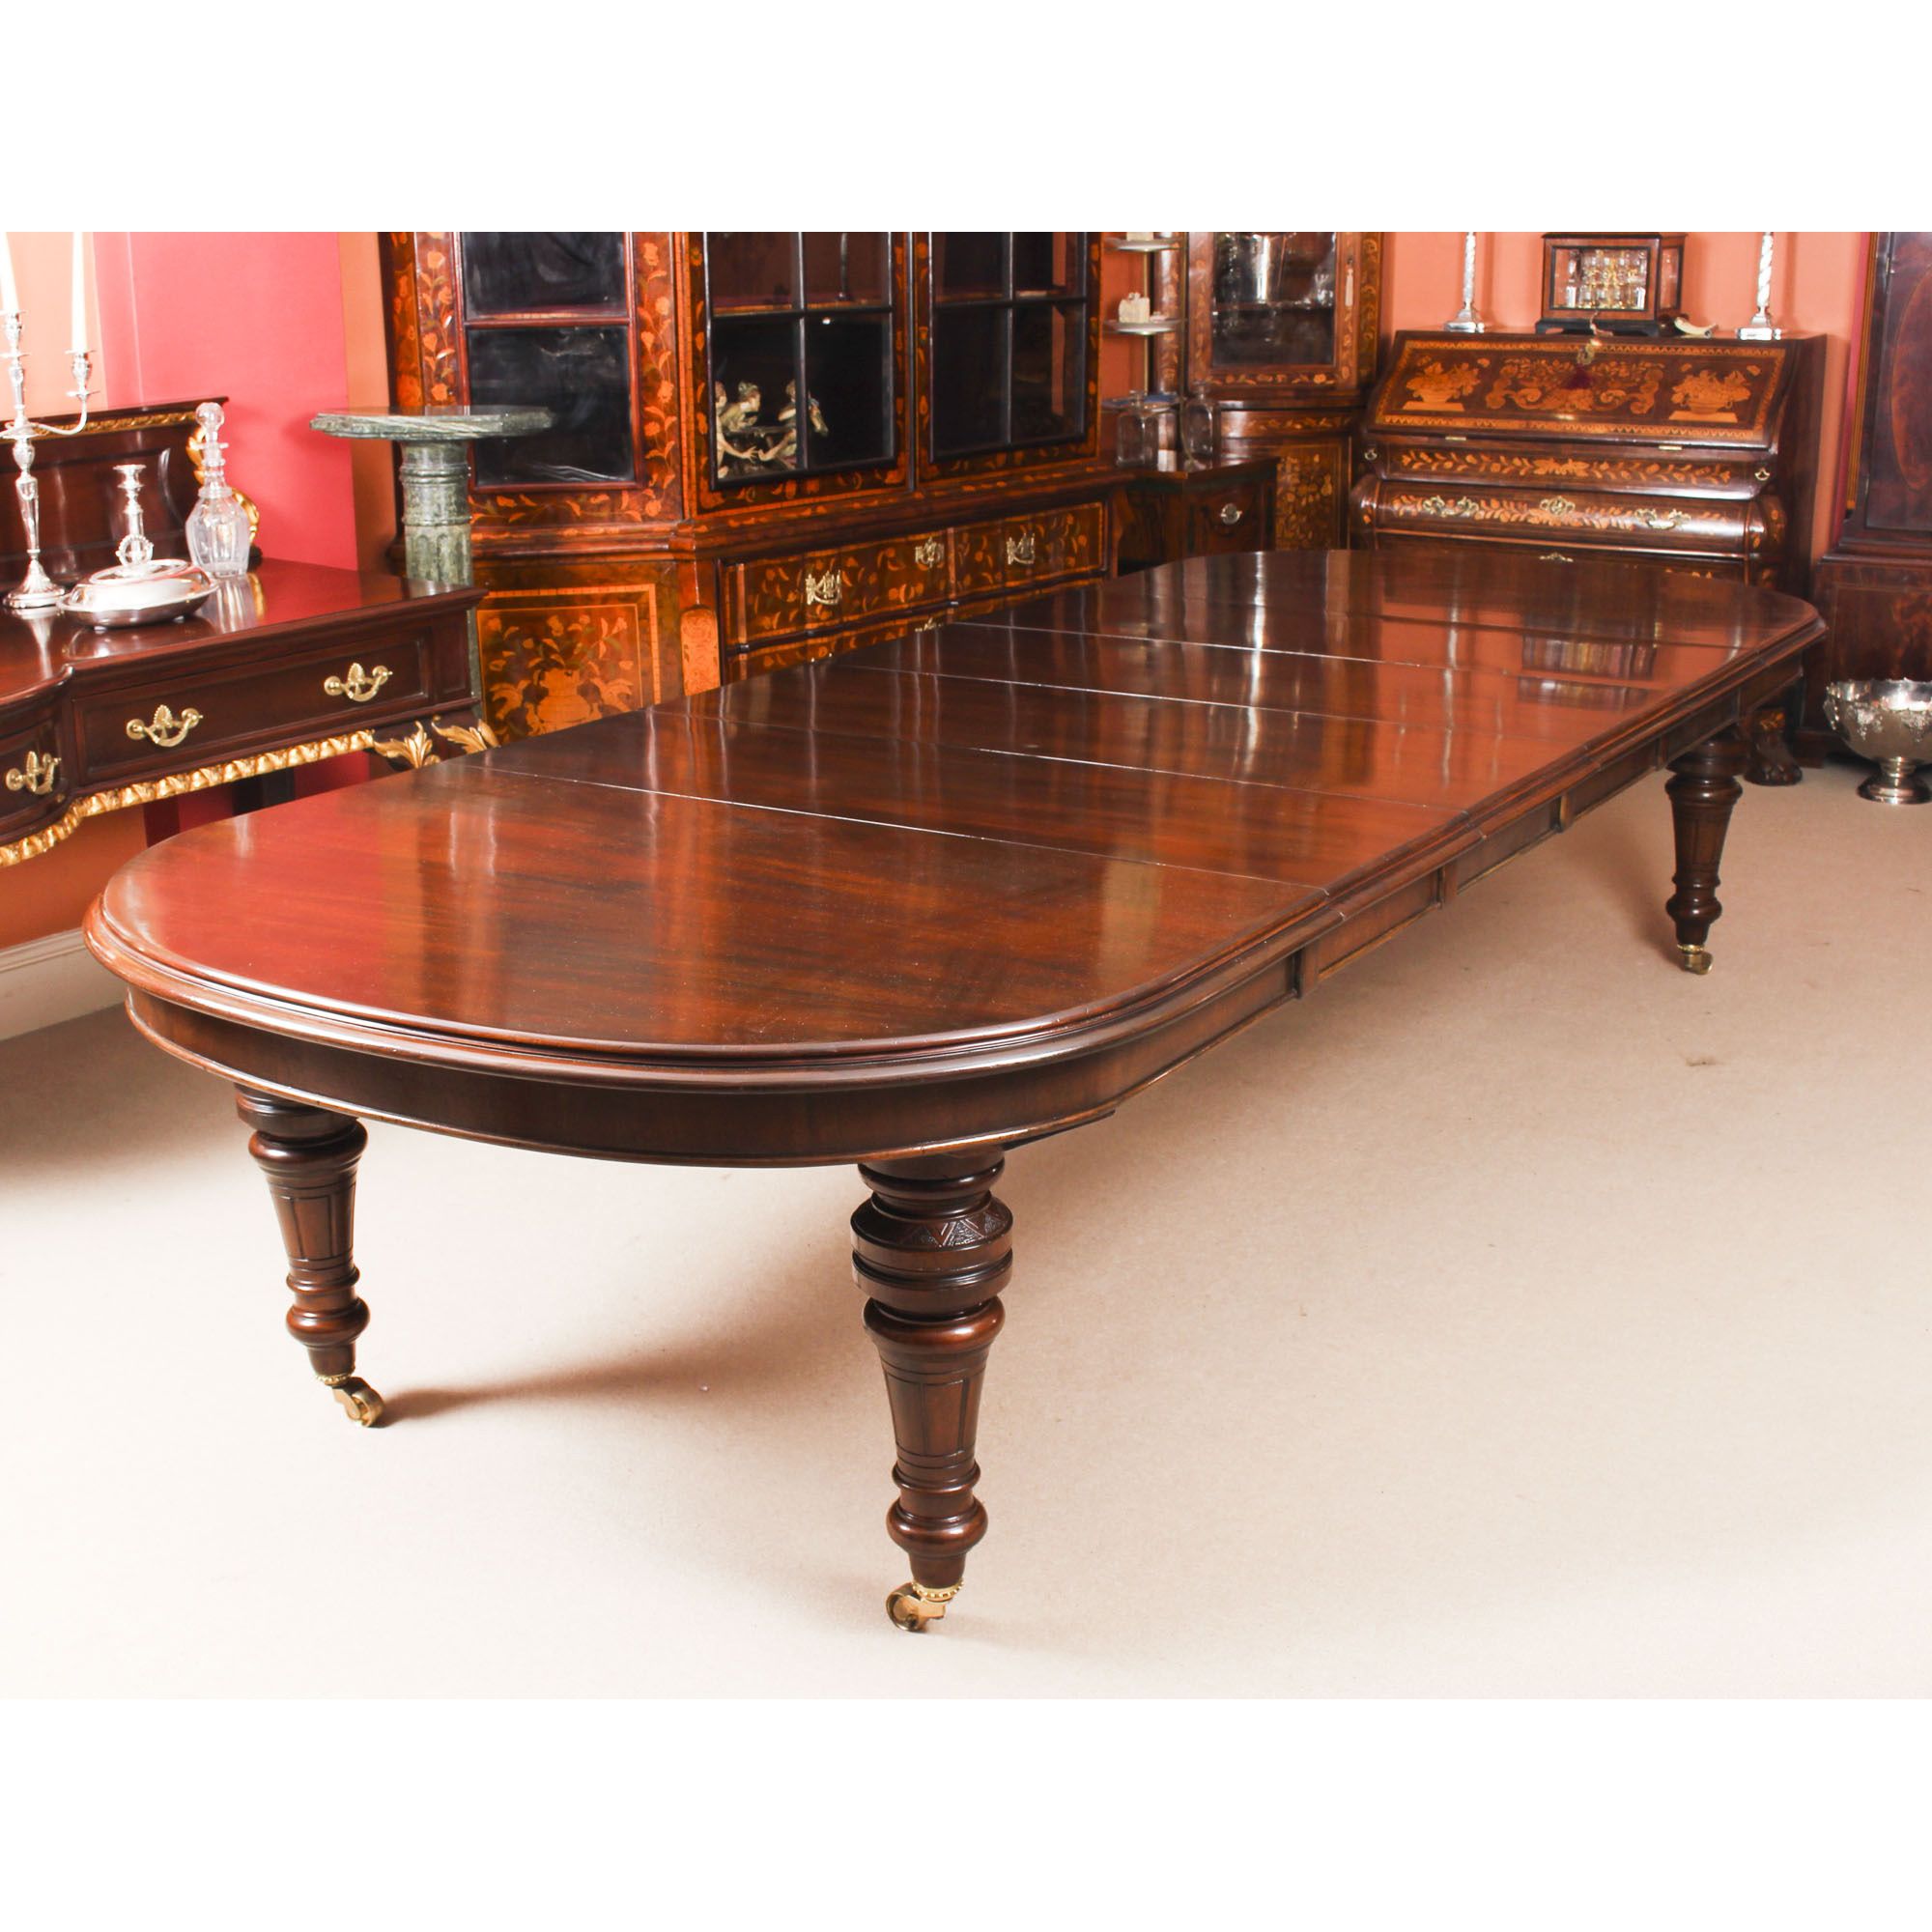 Rustic Mahogany Extending Dining Tables Pertaining To Latest Antique Victorian Mahogany Extending Dining Table 19Th C (View 9 of 25)